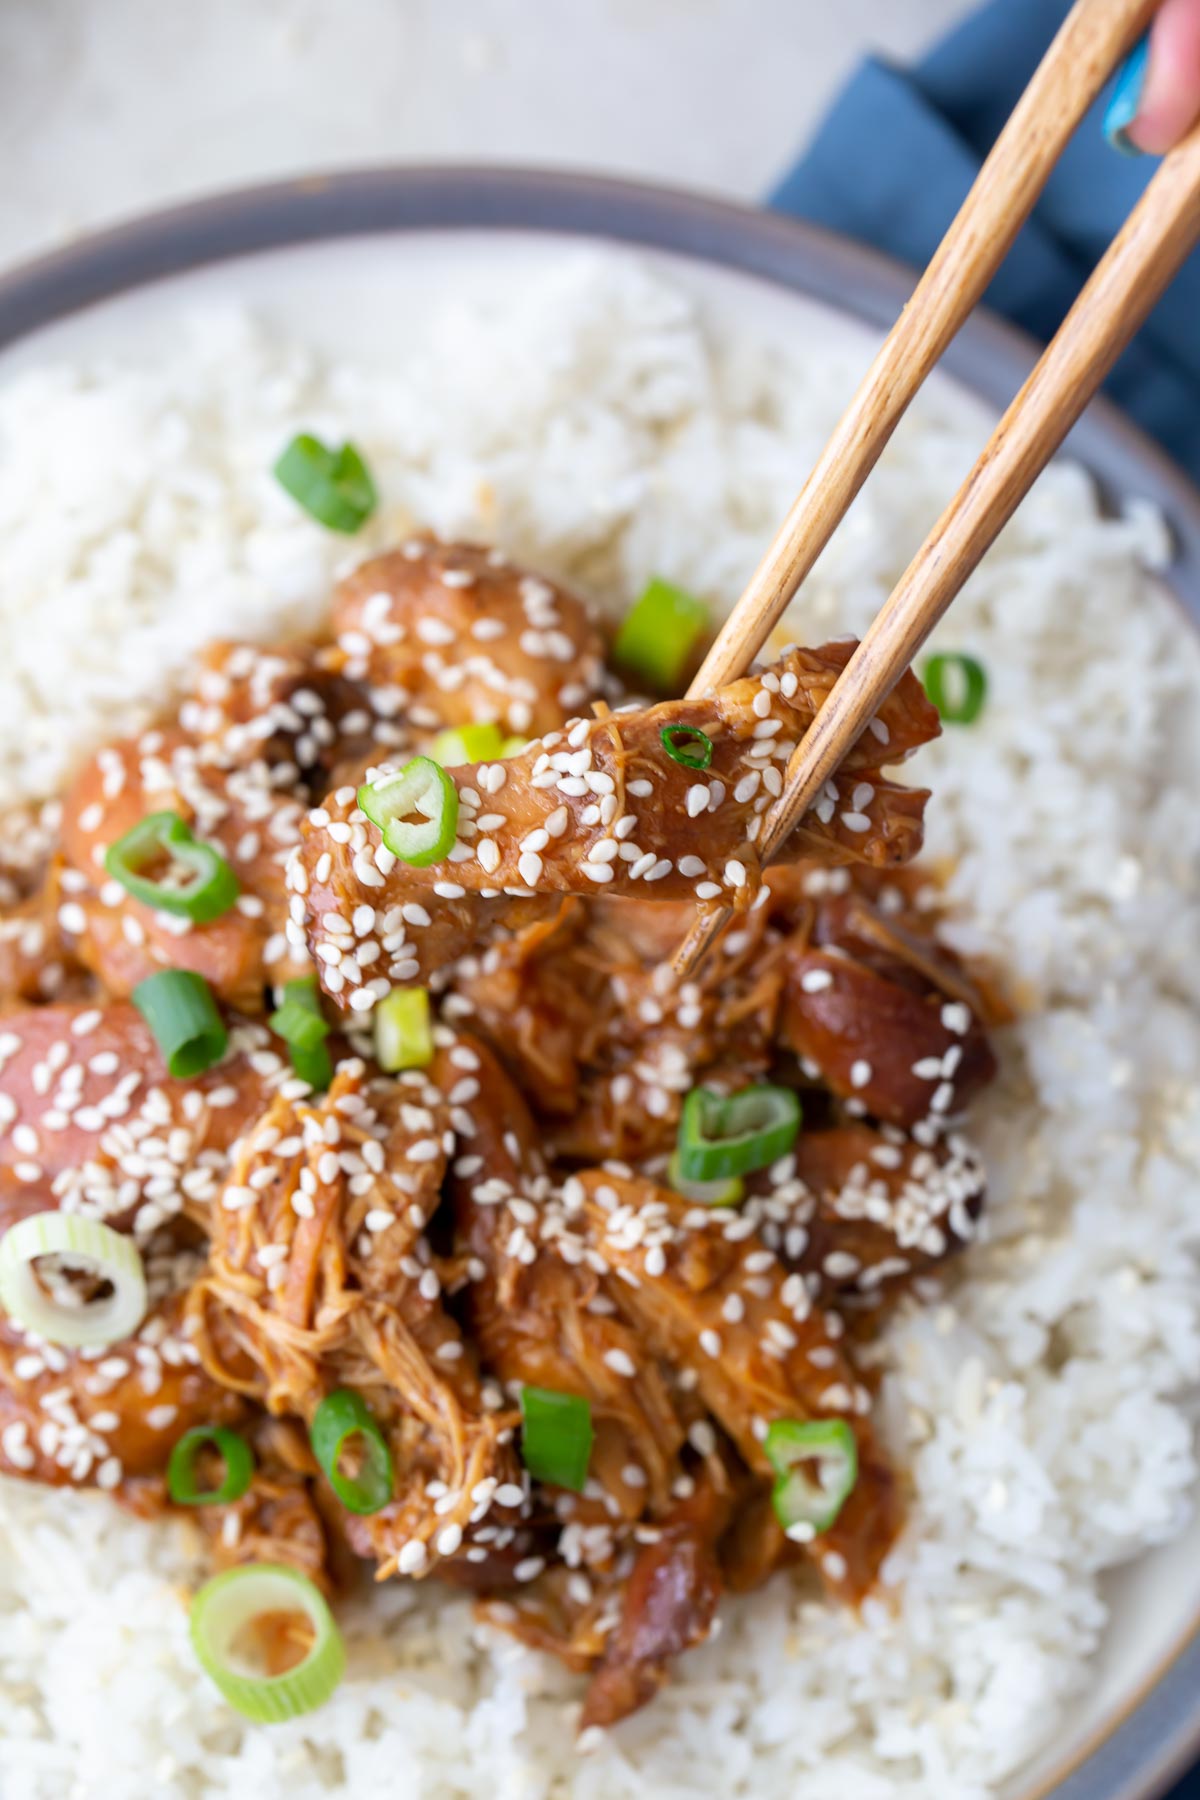 A bite of sesame chicken held with chopsticks over a plate of rice and sesame chicken.